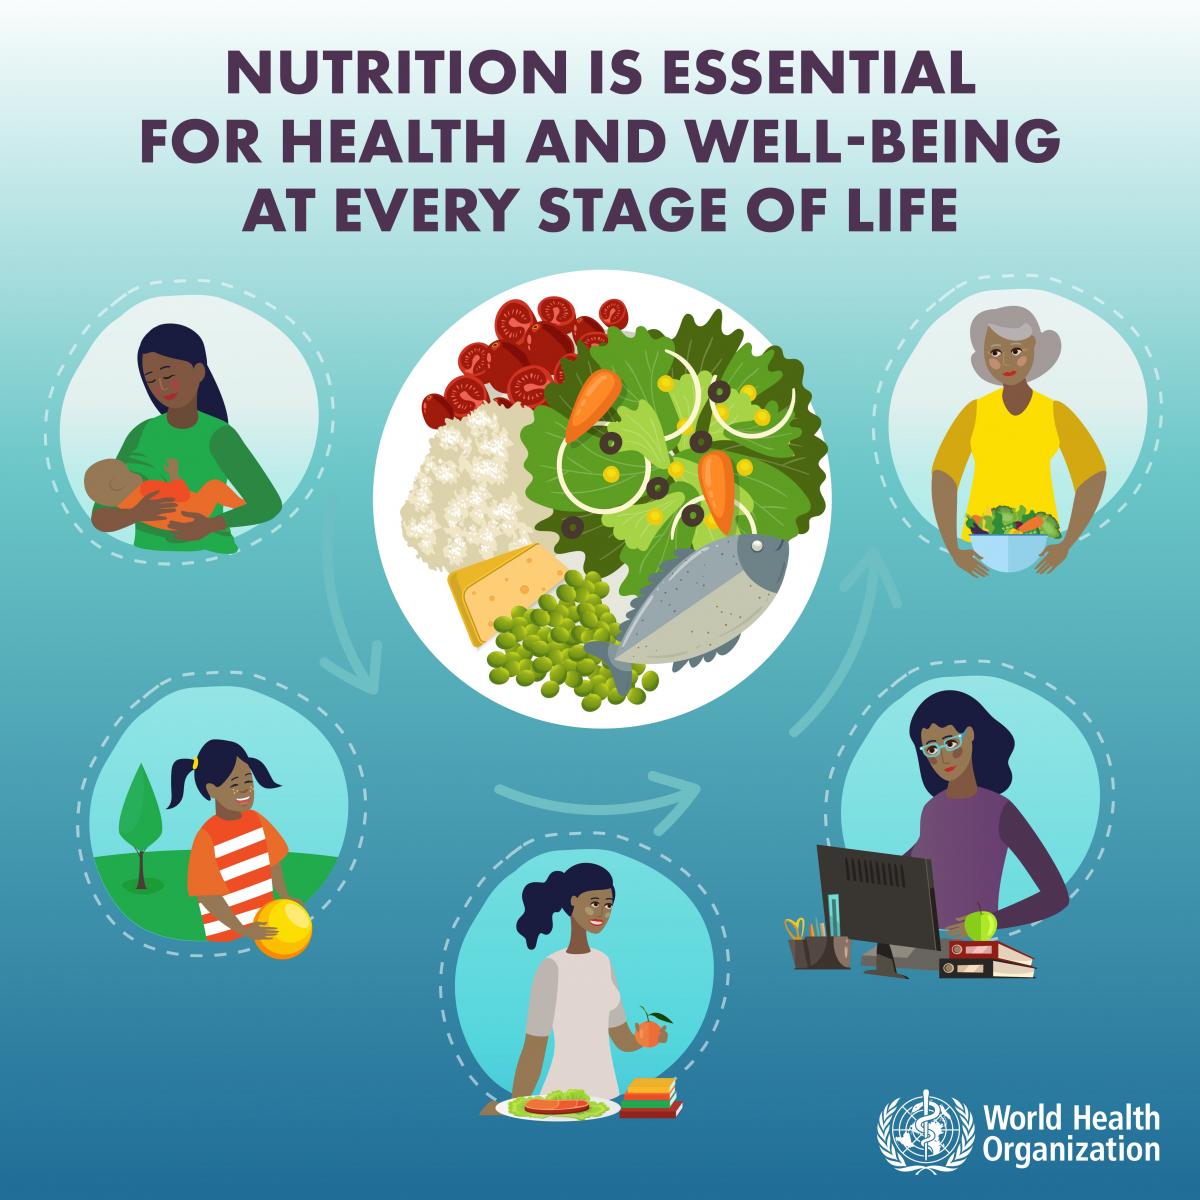 Infographic from World Health Organization